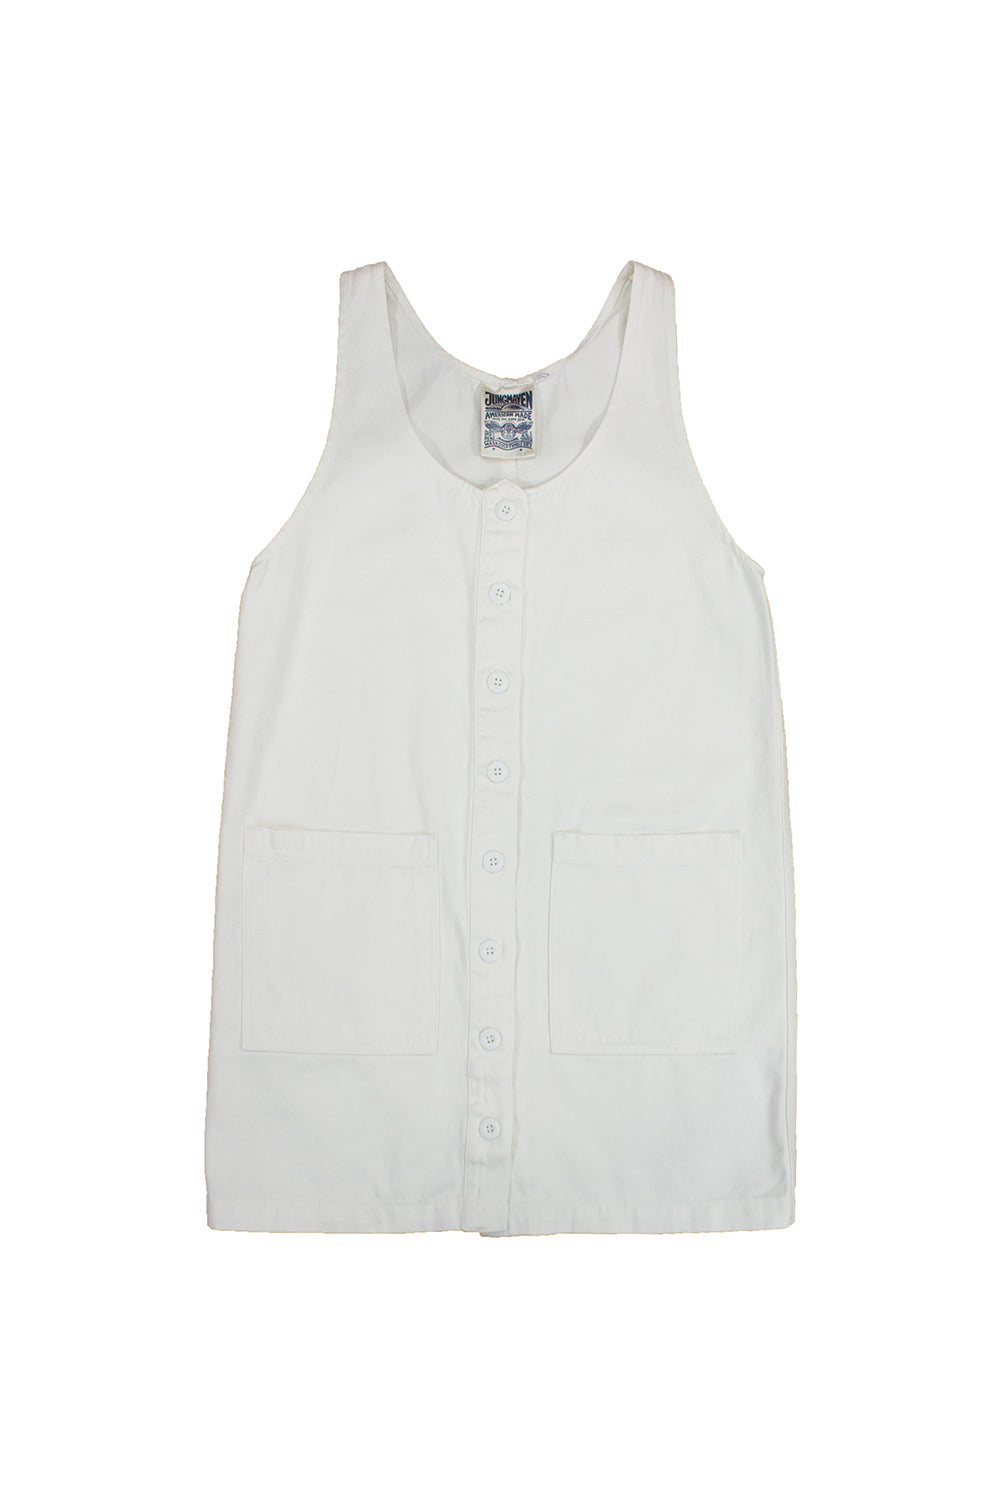 Jumper Dress | Jungmaven Hemp Clothing & Accessories / Color: Washed White